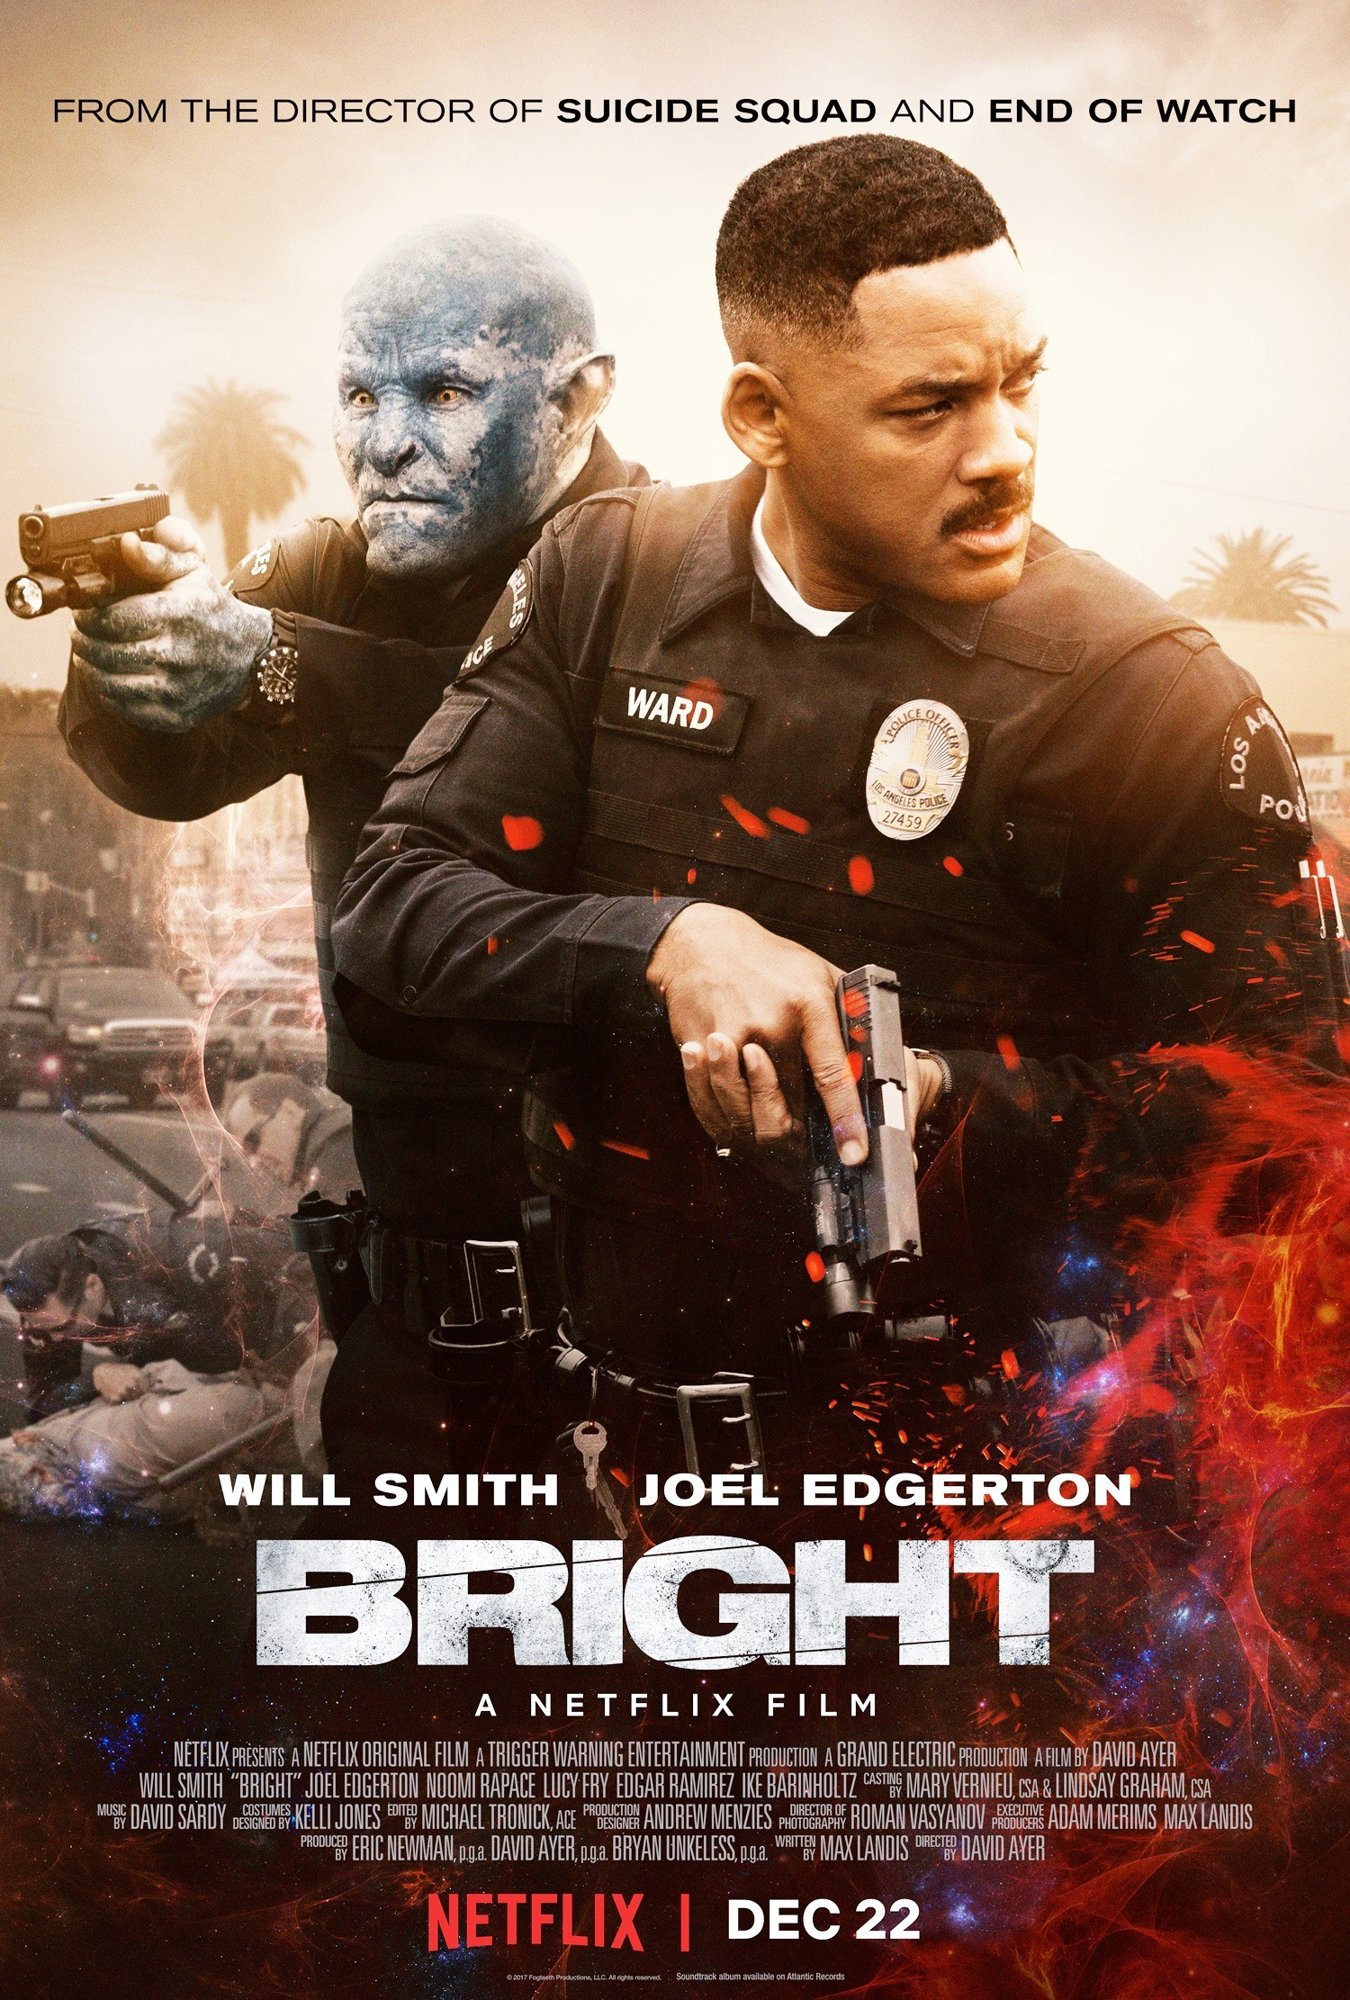 Poster of Netflix's Bright (2017)